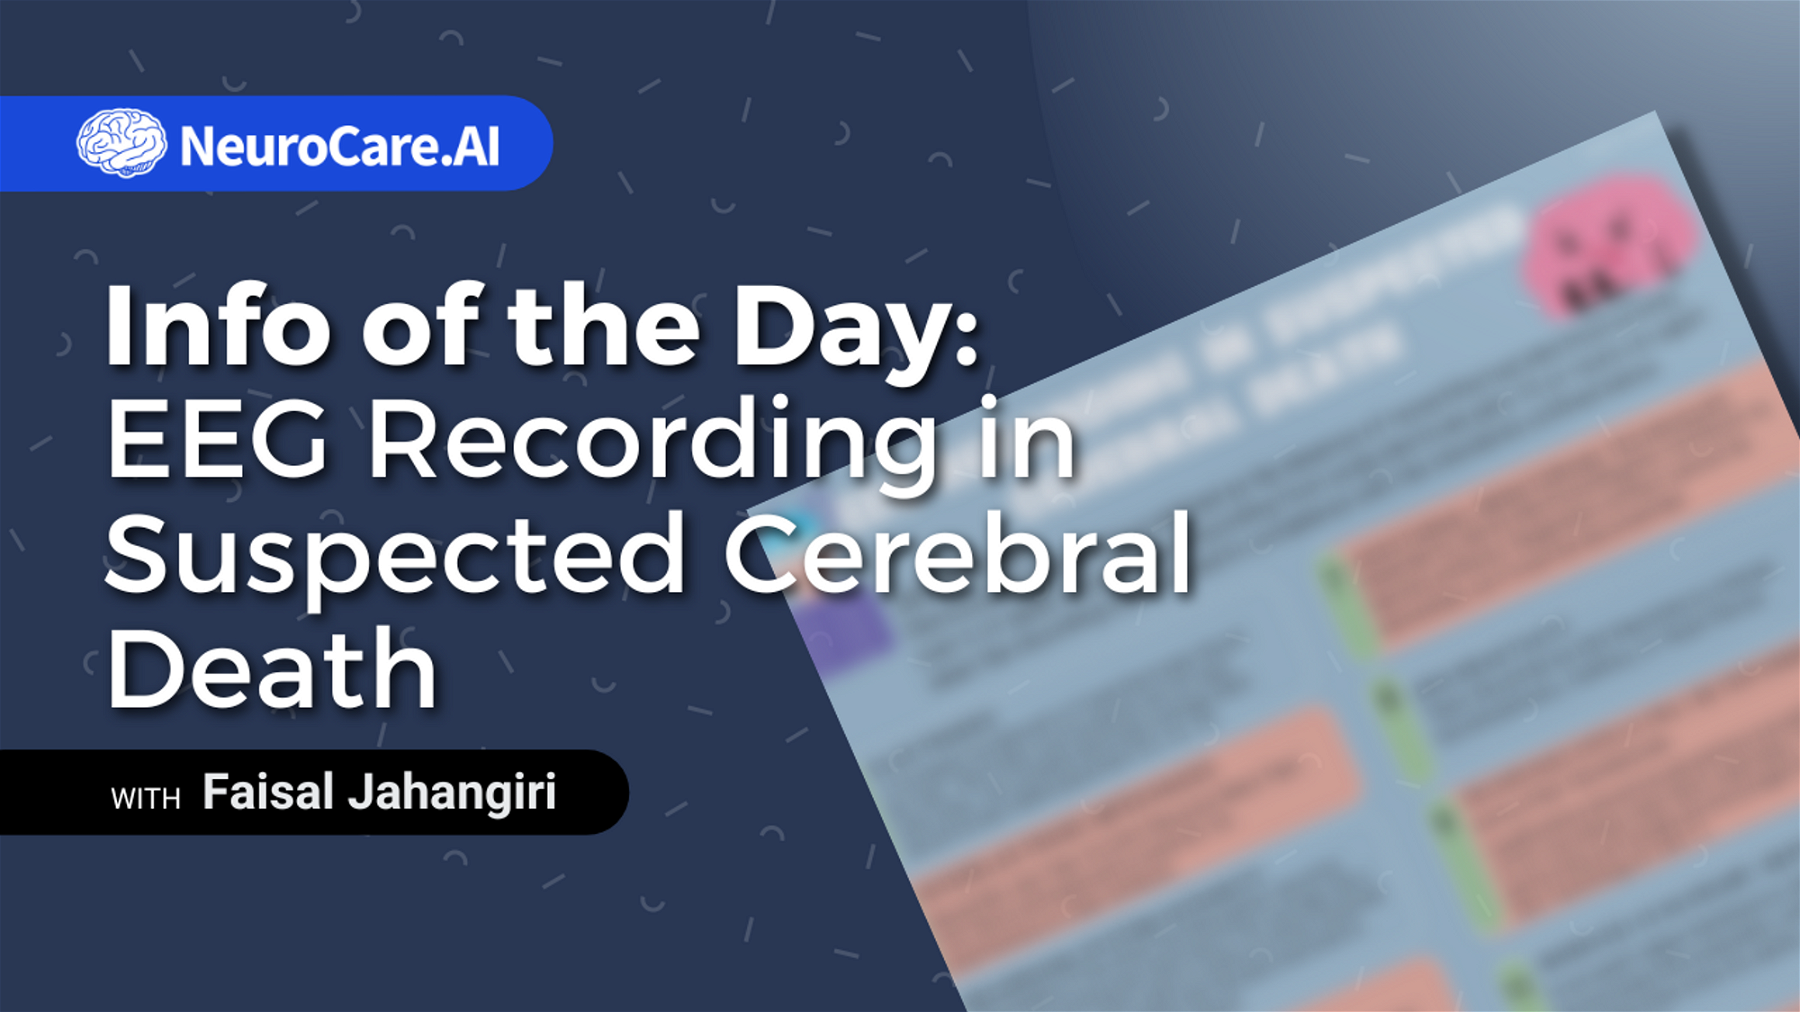 Info of the Day: "EEG Recording in Suspected Cerebral Death"